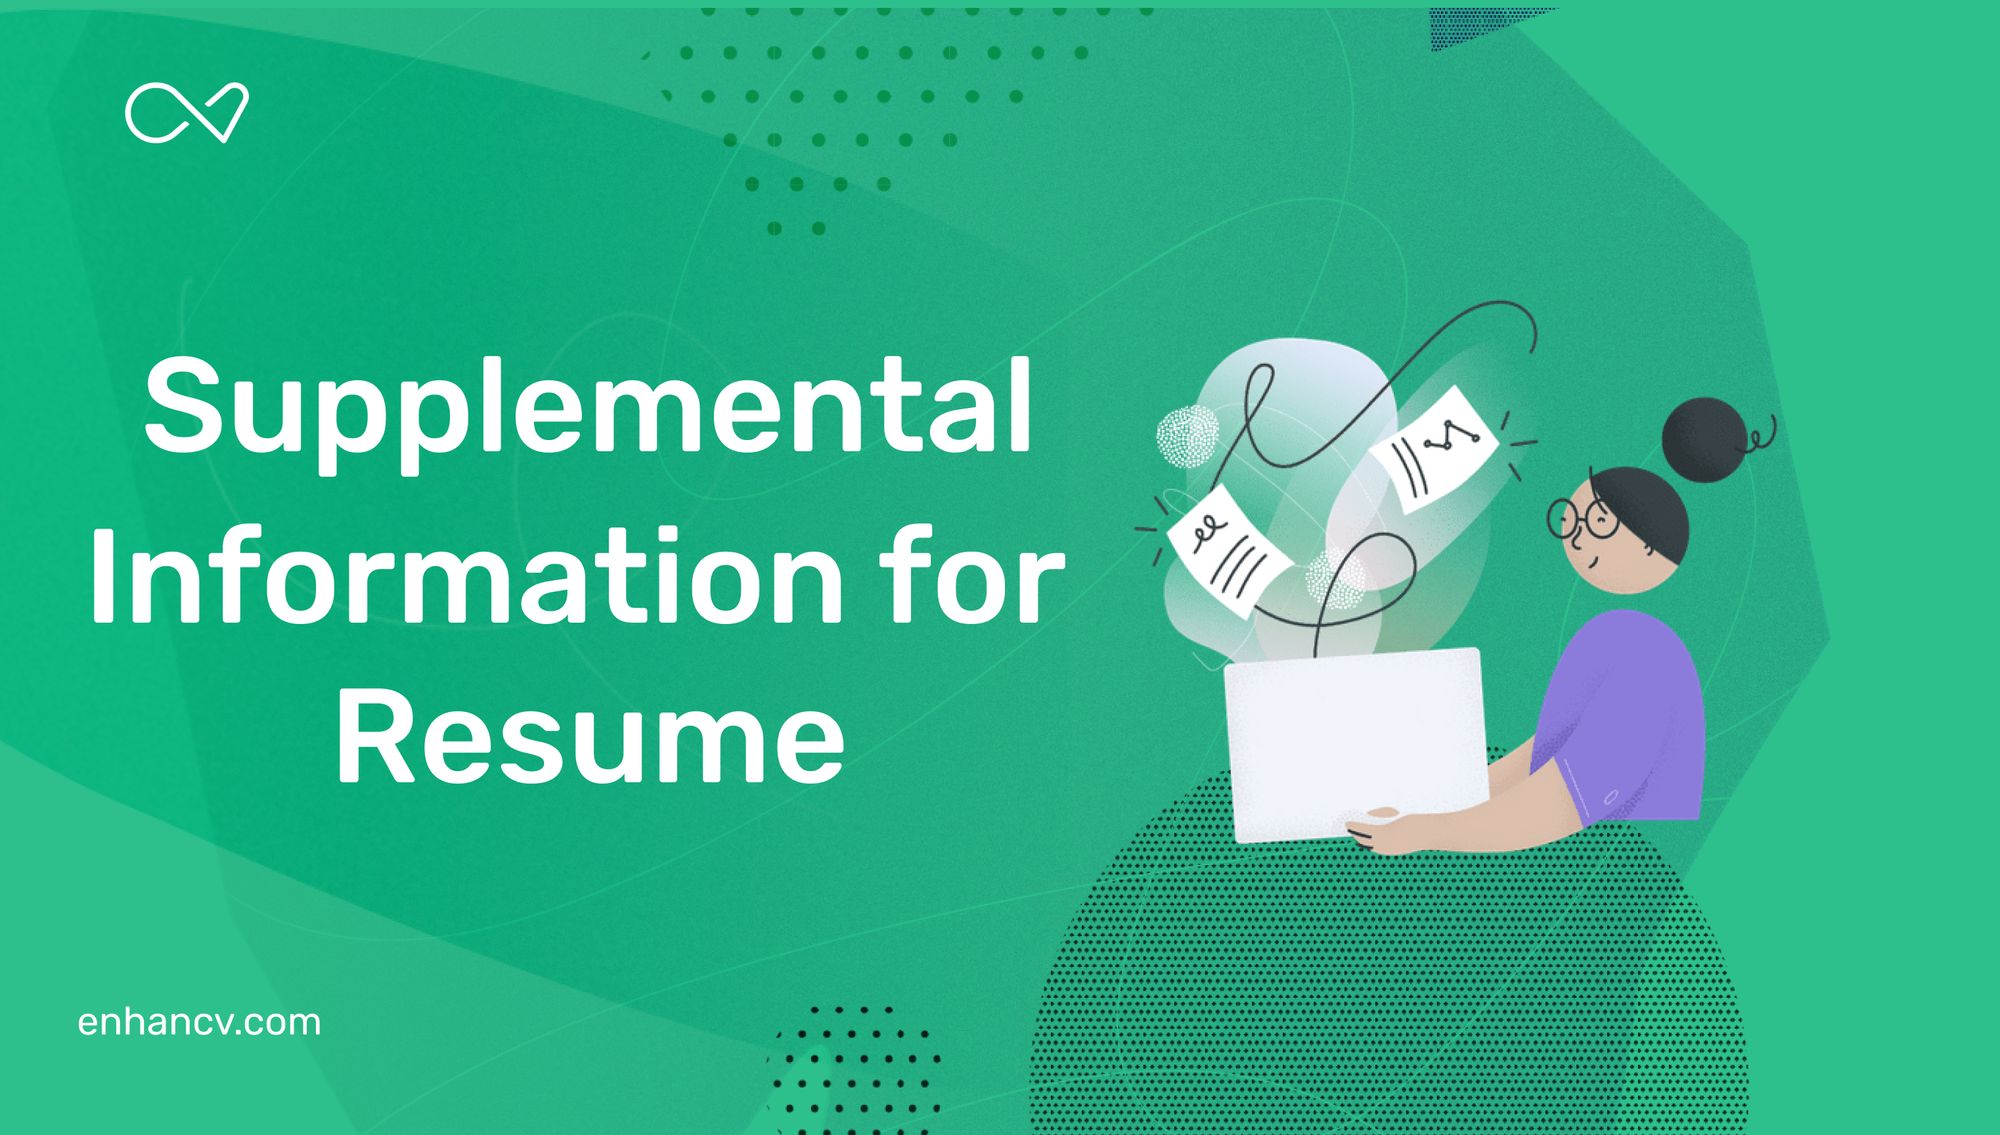 How to Add Supplemental Information to Your Resume